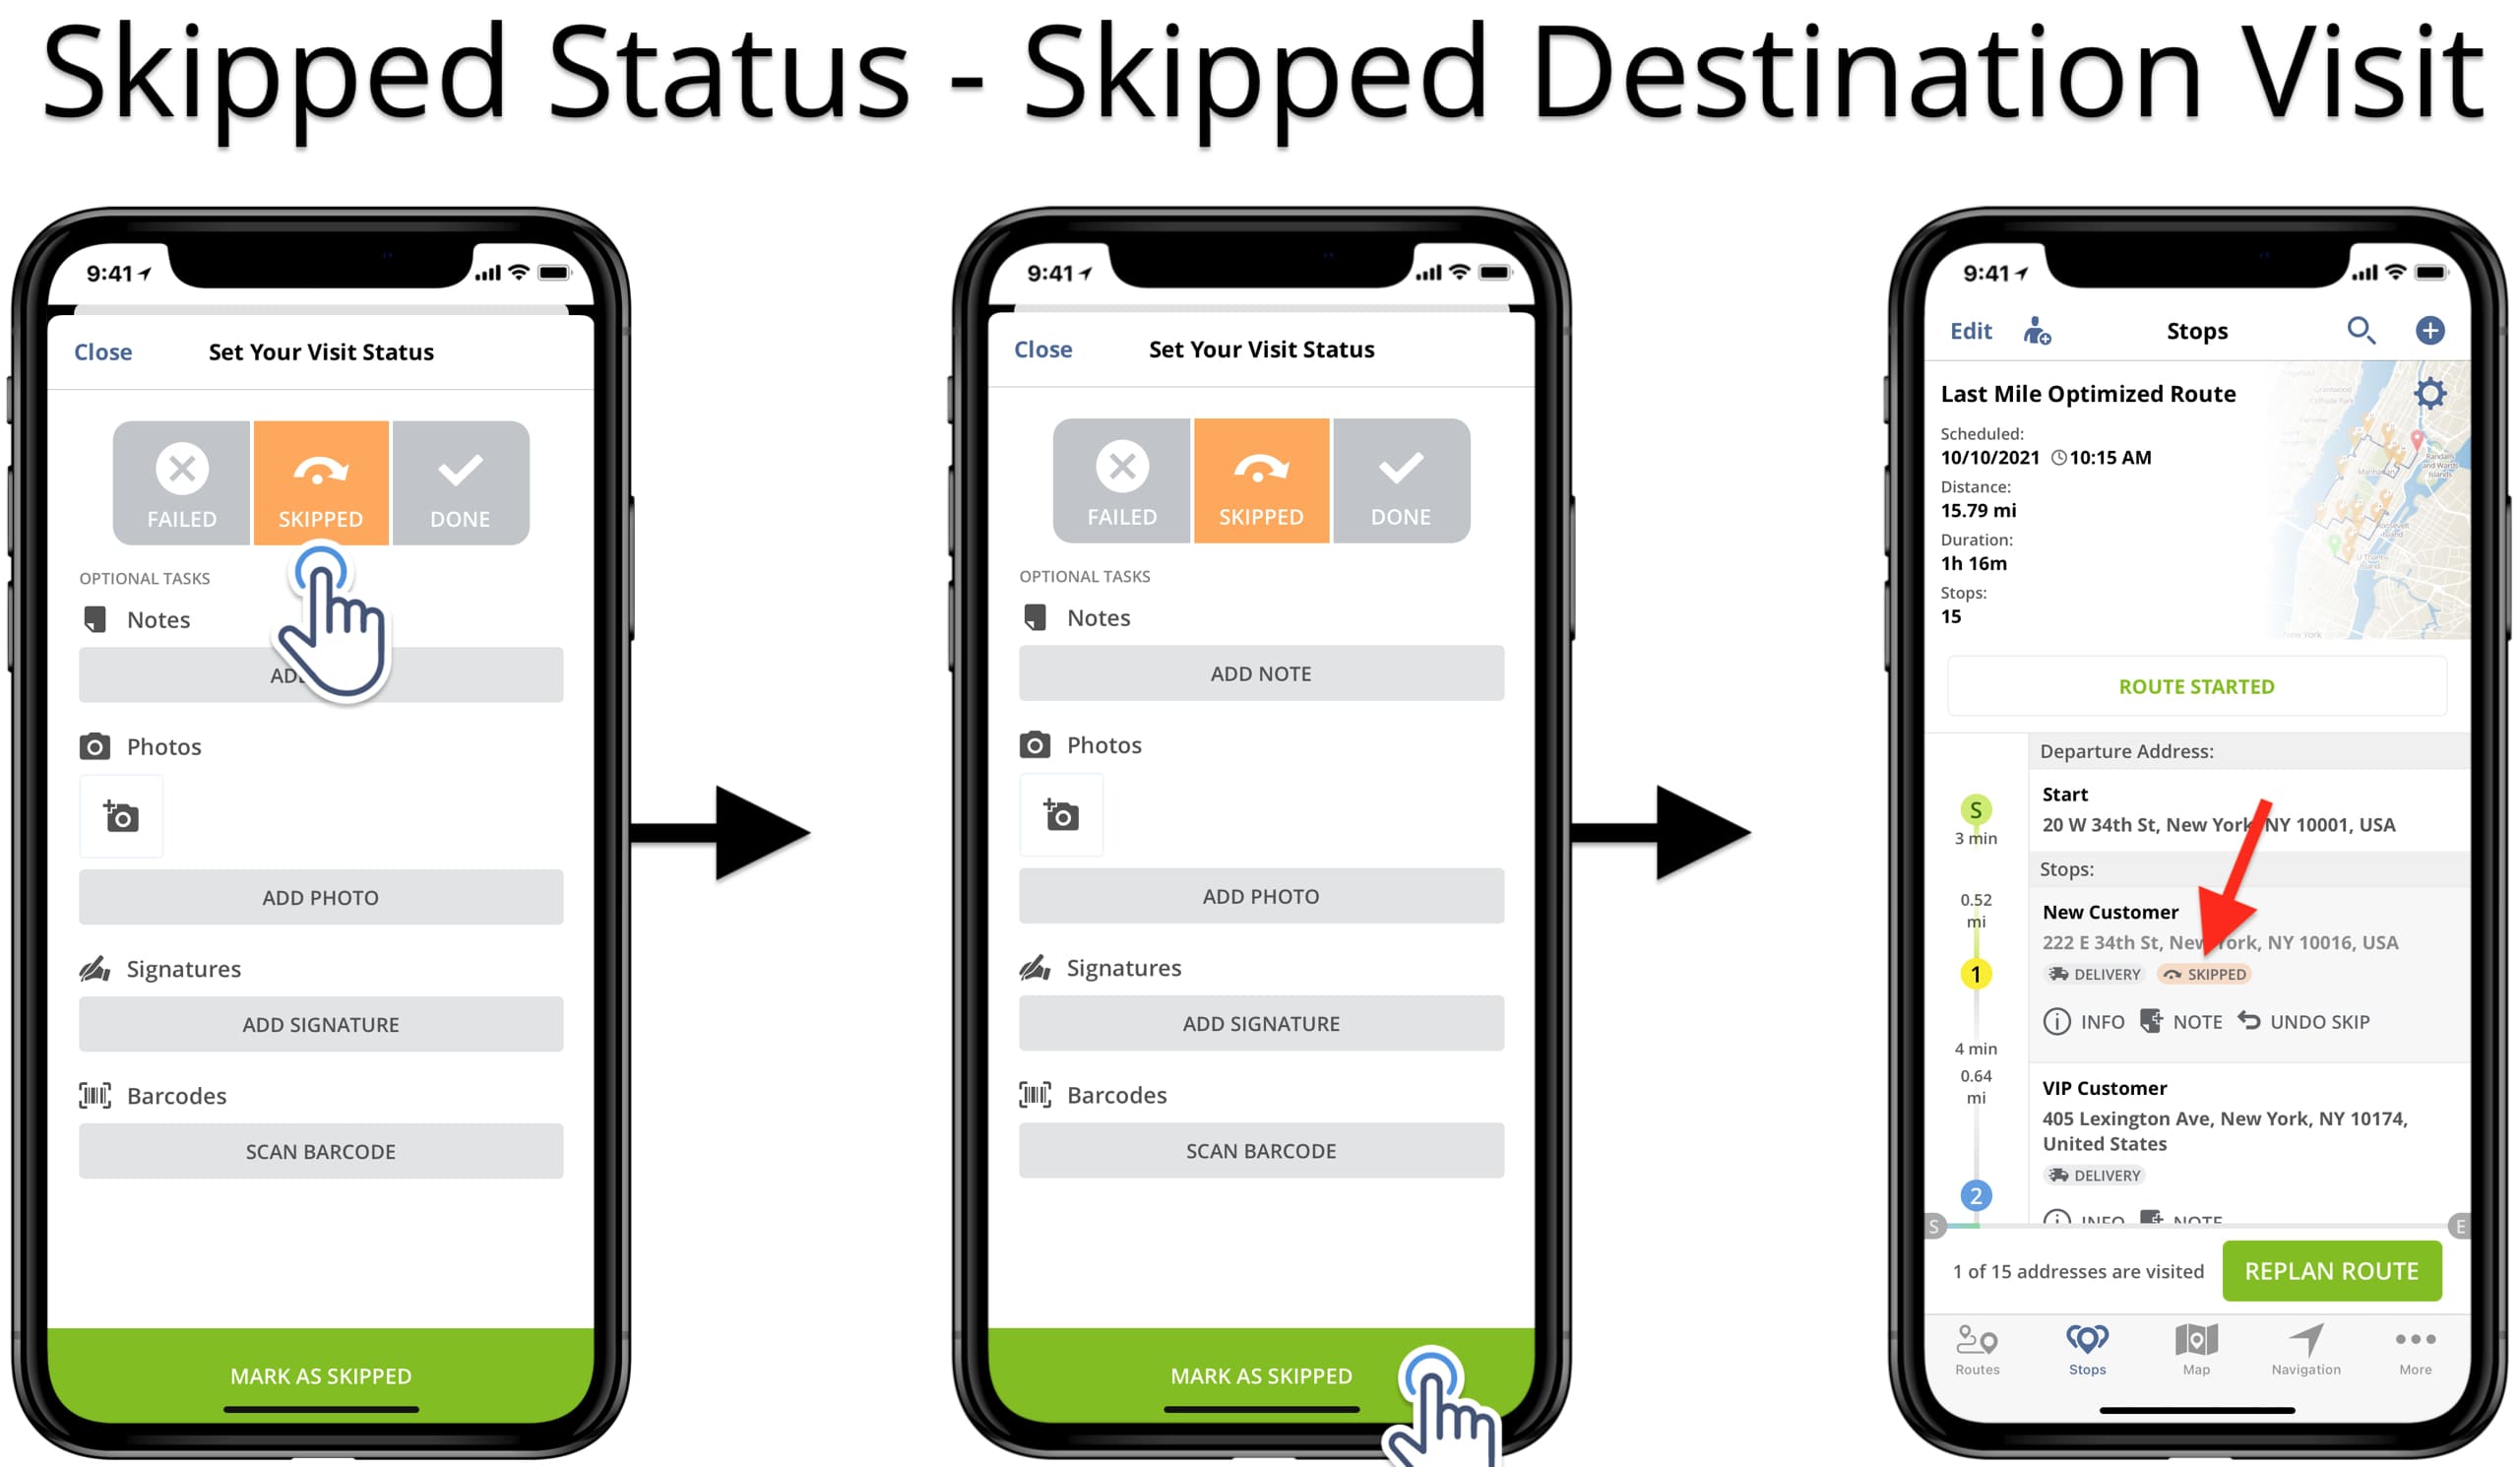 Add Skipped order status to avoided and not visited route stops using the iOS Route Planner app.